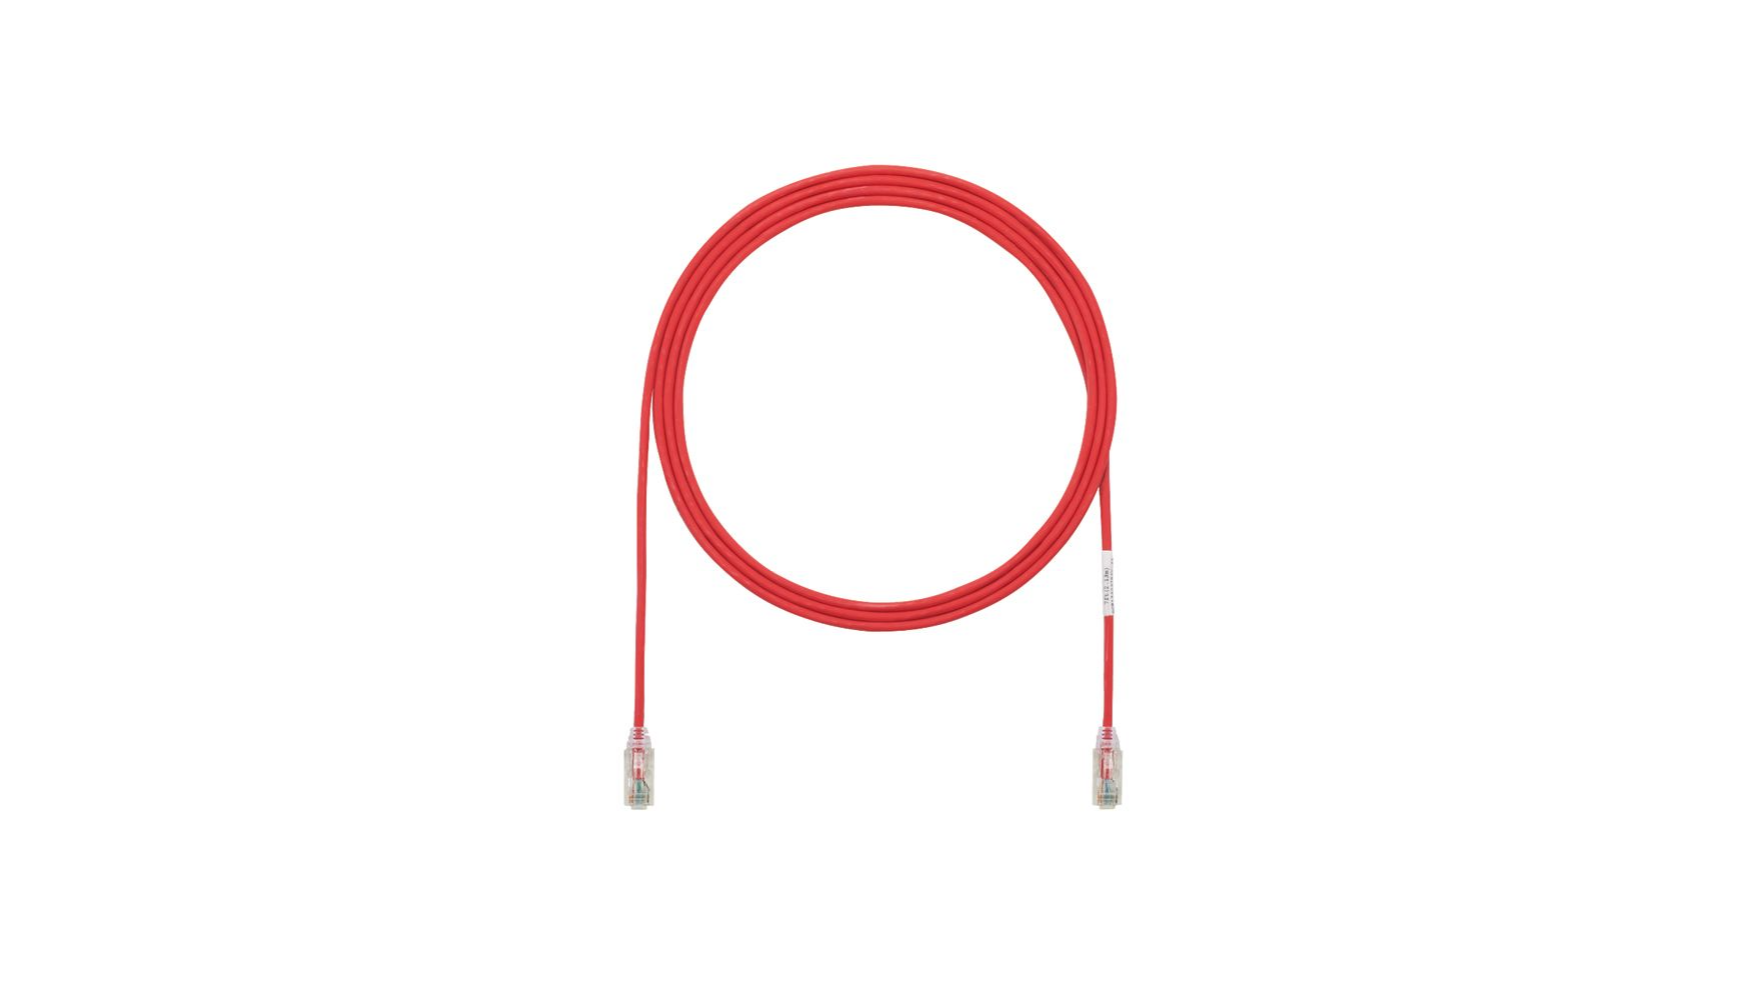 Panduit Copper Patch Cord, Cat 6, AWG 28, Red UTP Cable, 2 m